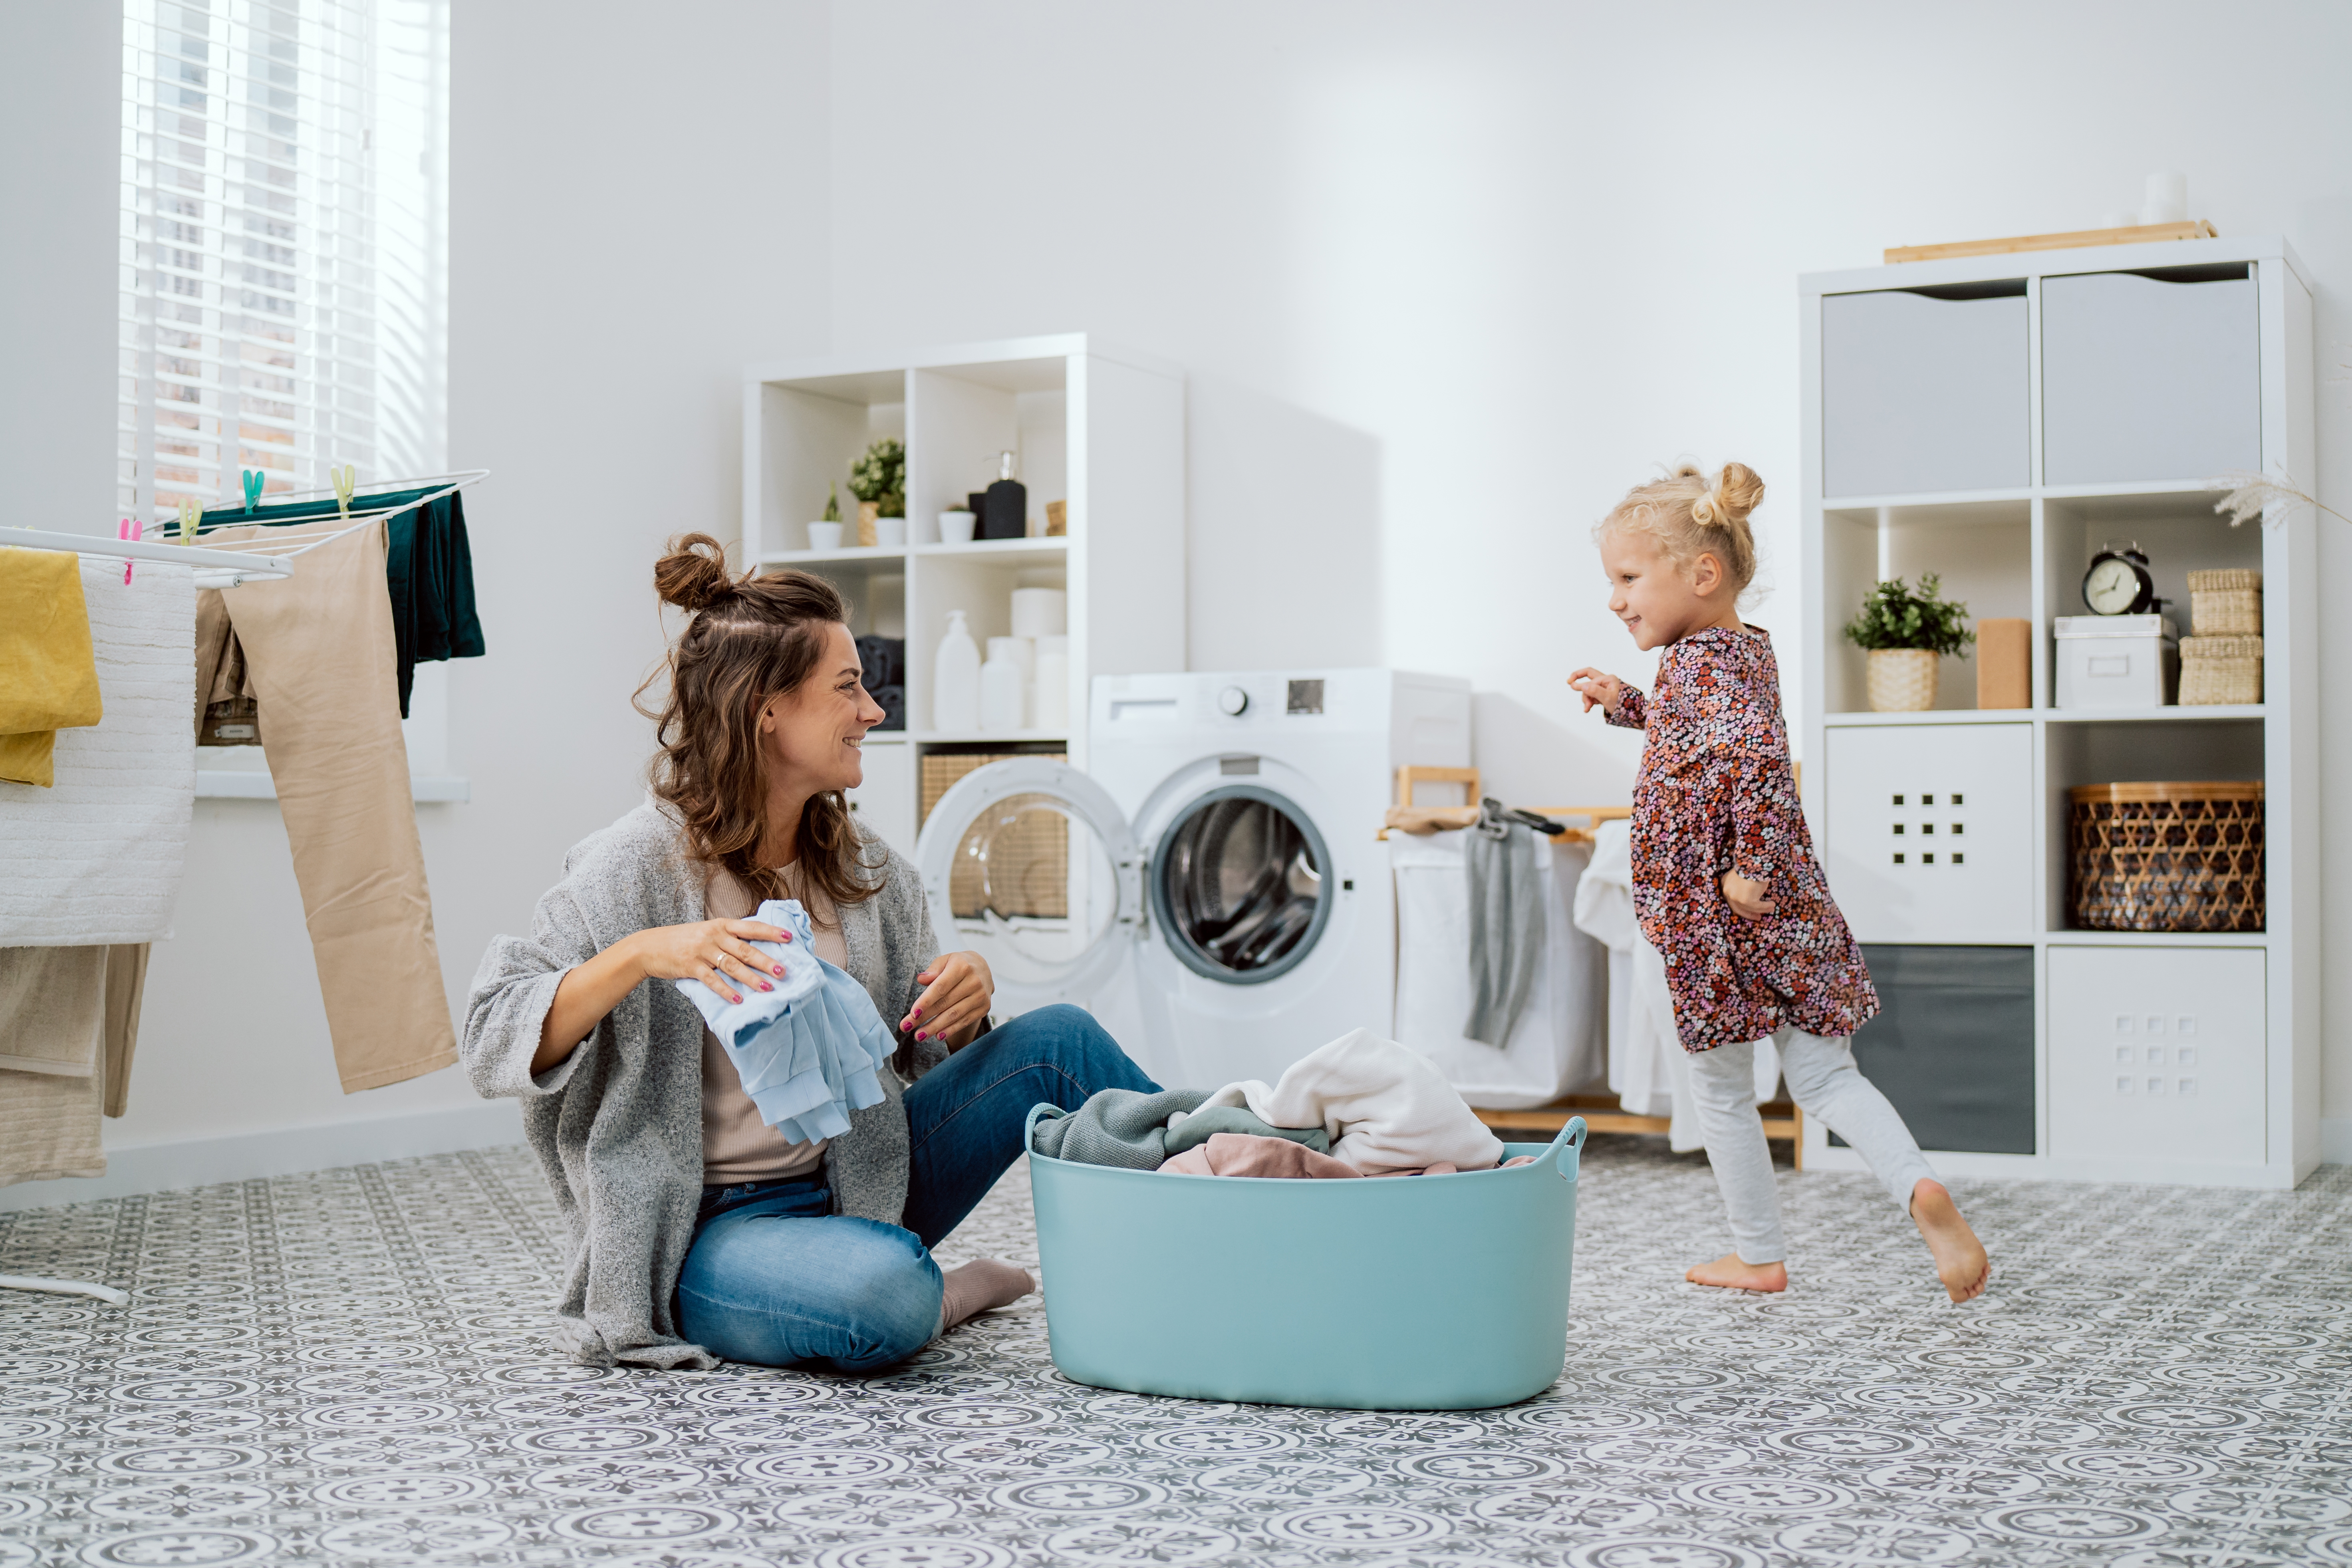 Mother doing laundry in the laundry room while daughter runs around